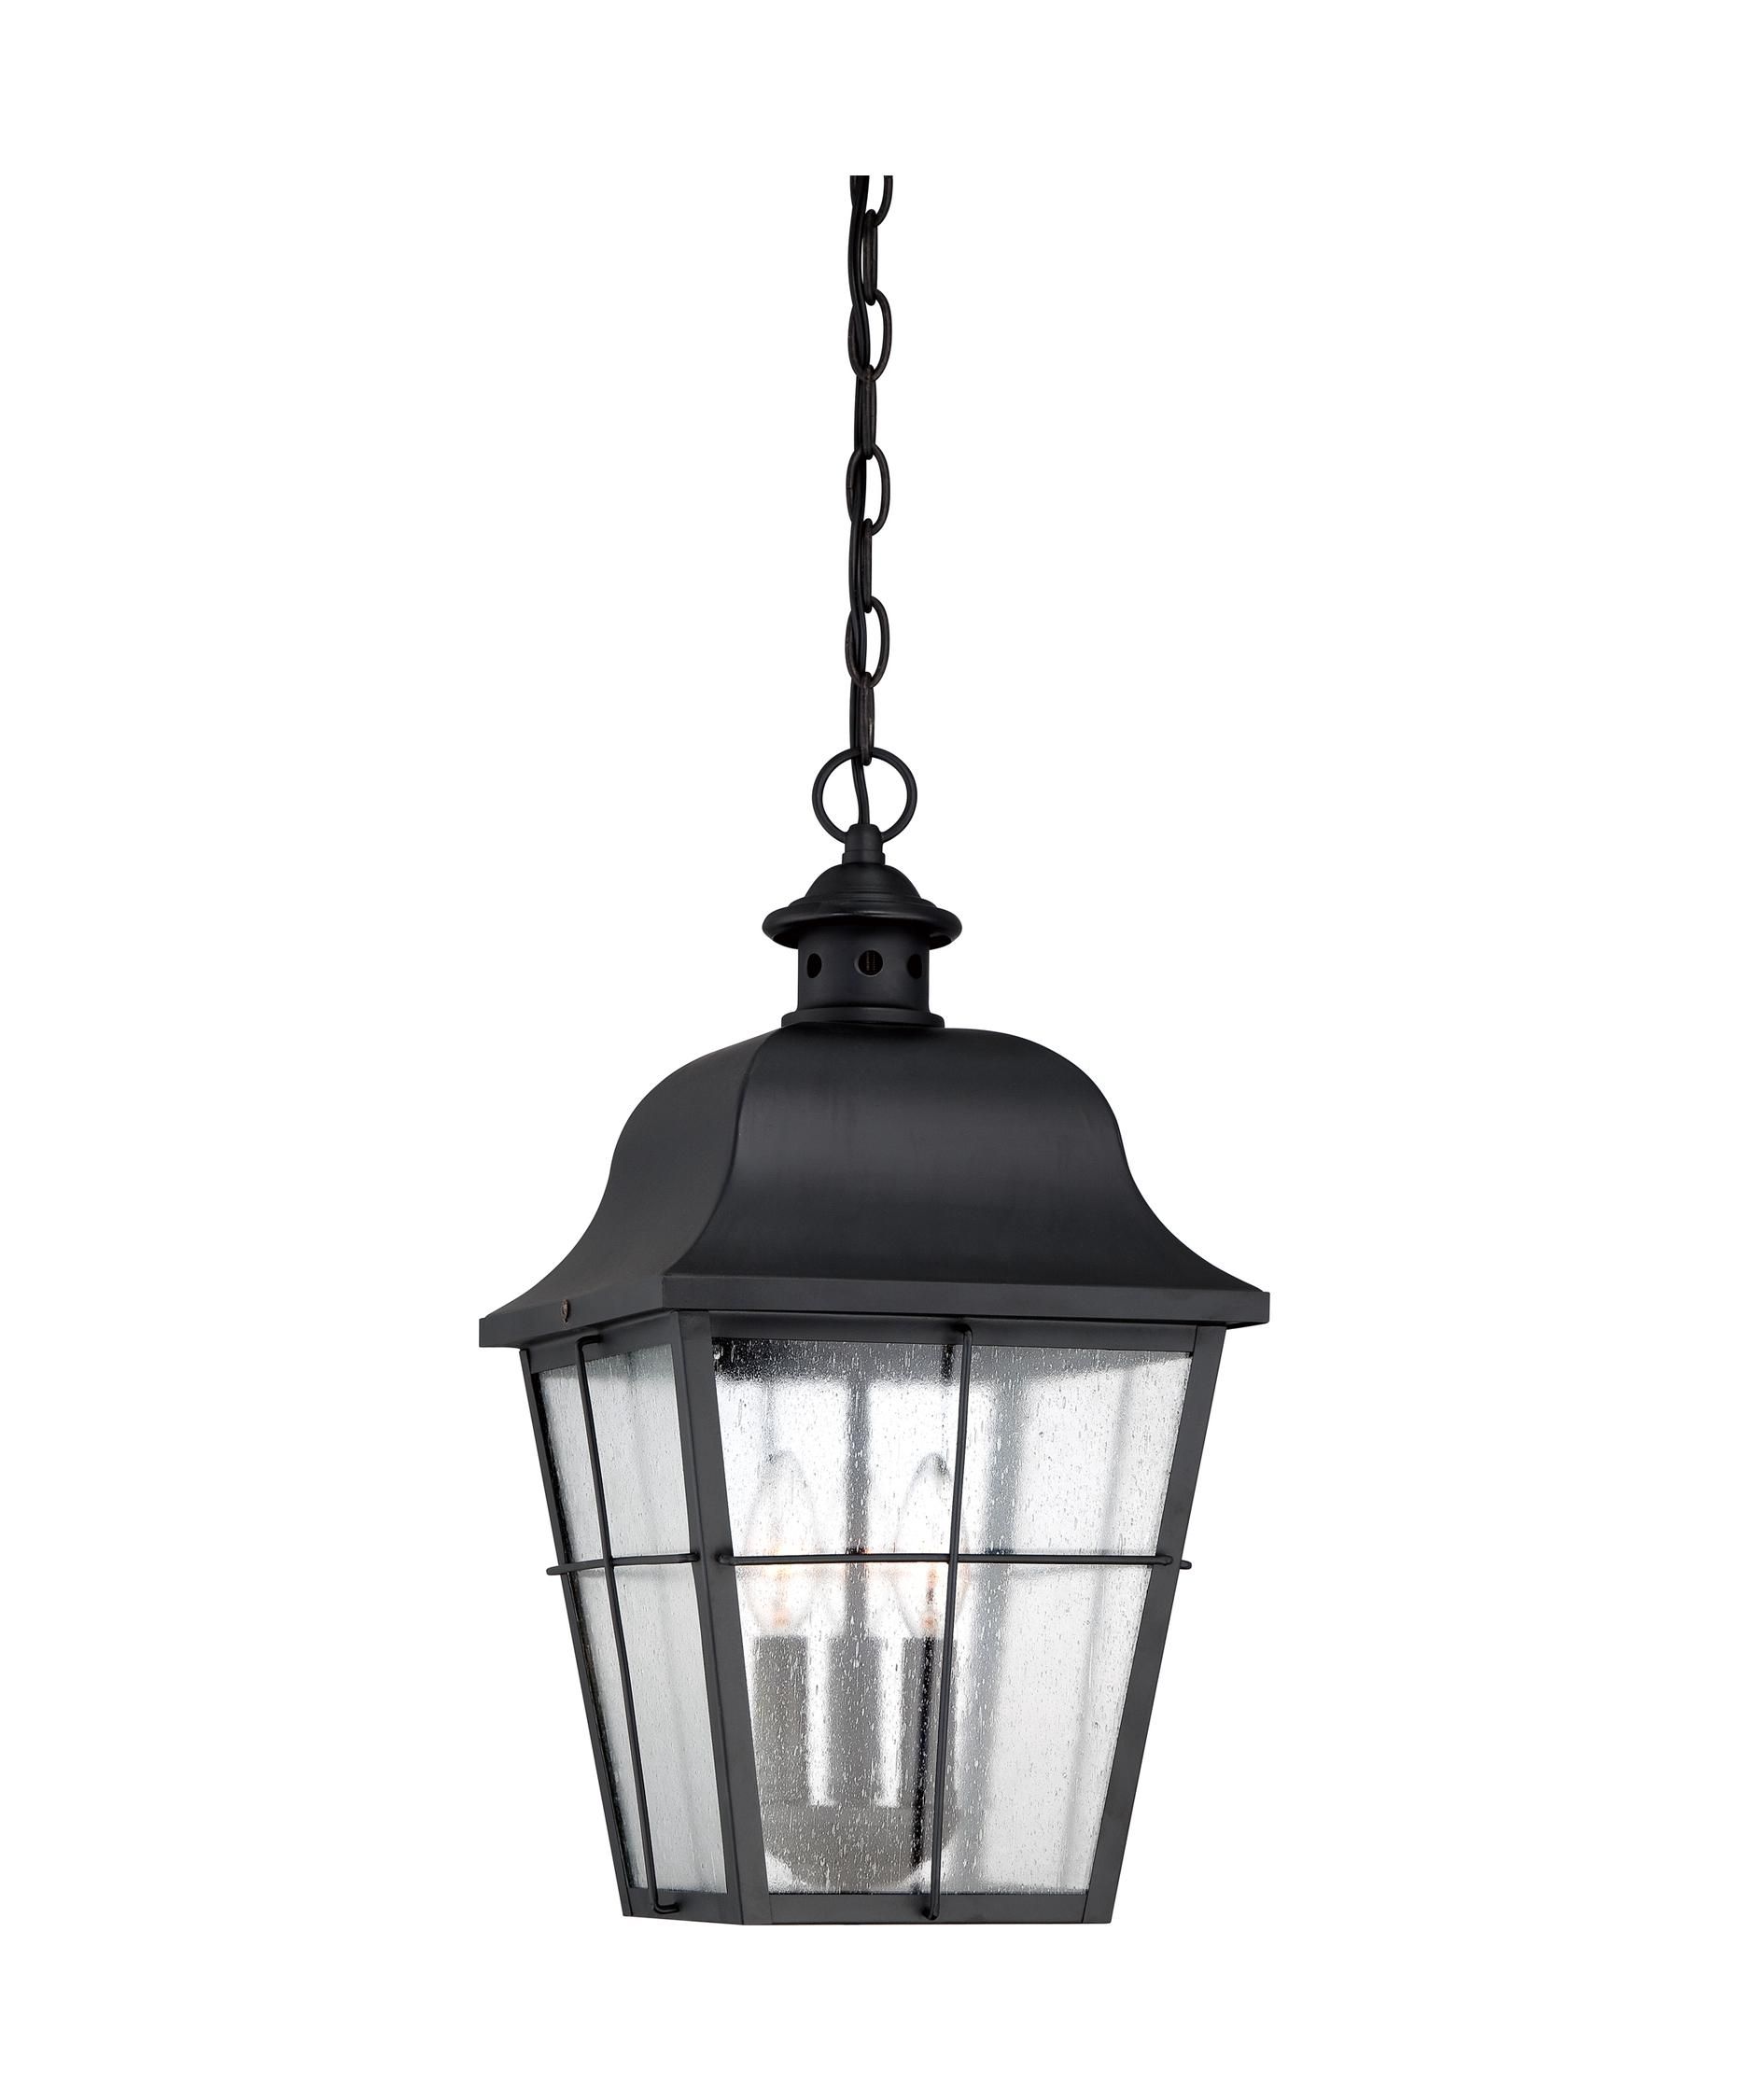 Quoizel Mhe1910 Millhouse 10 Inch Wide 3 Light Outdoor Hanging Within Quoizel Outdoor Hanging Lights (View 9 of 15)